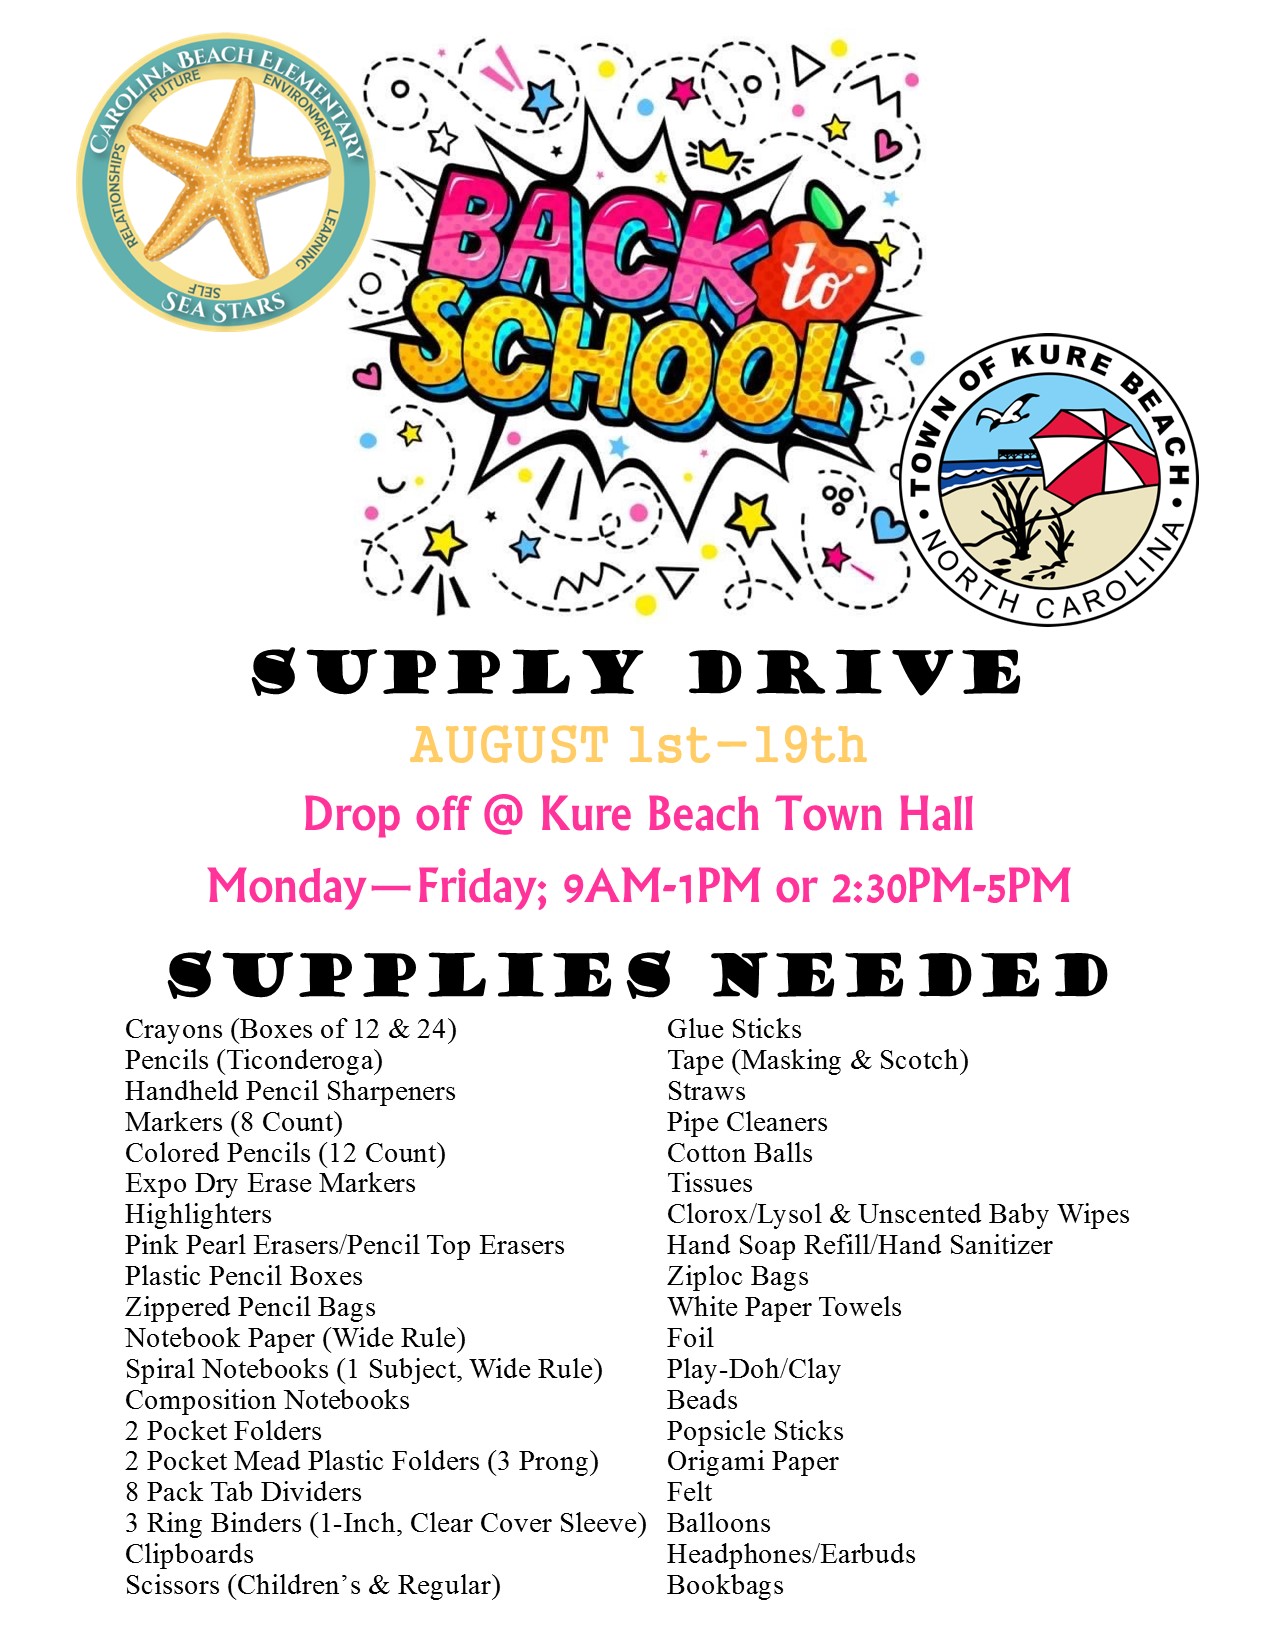 Back to School Supply Drive Details